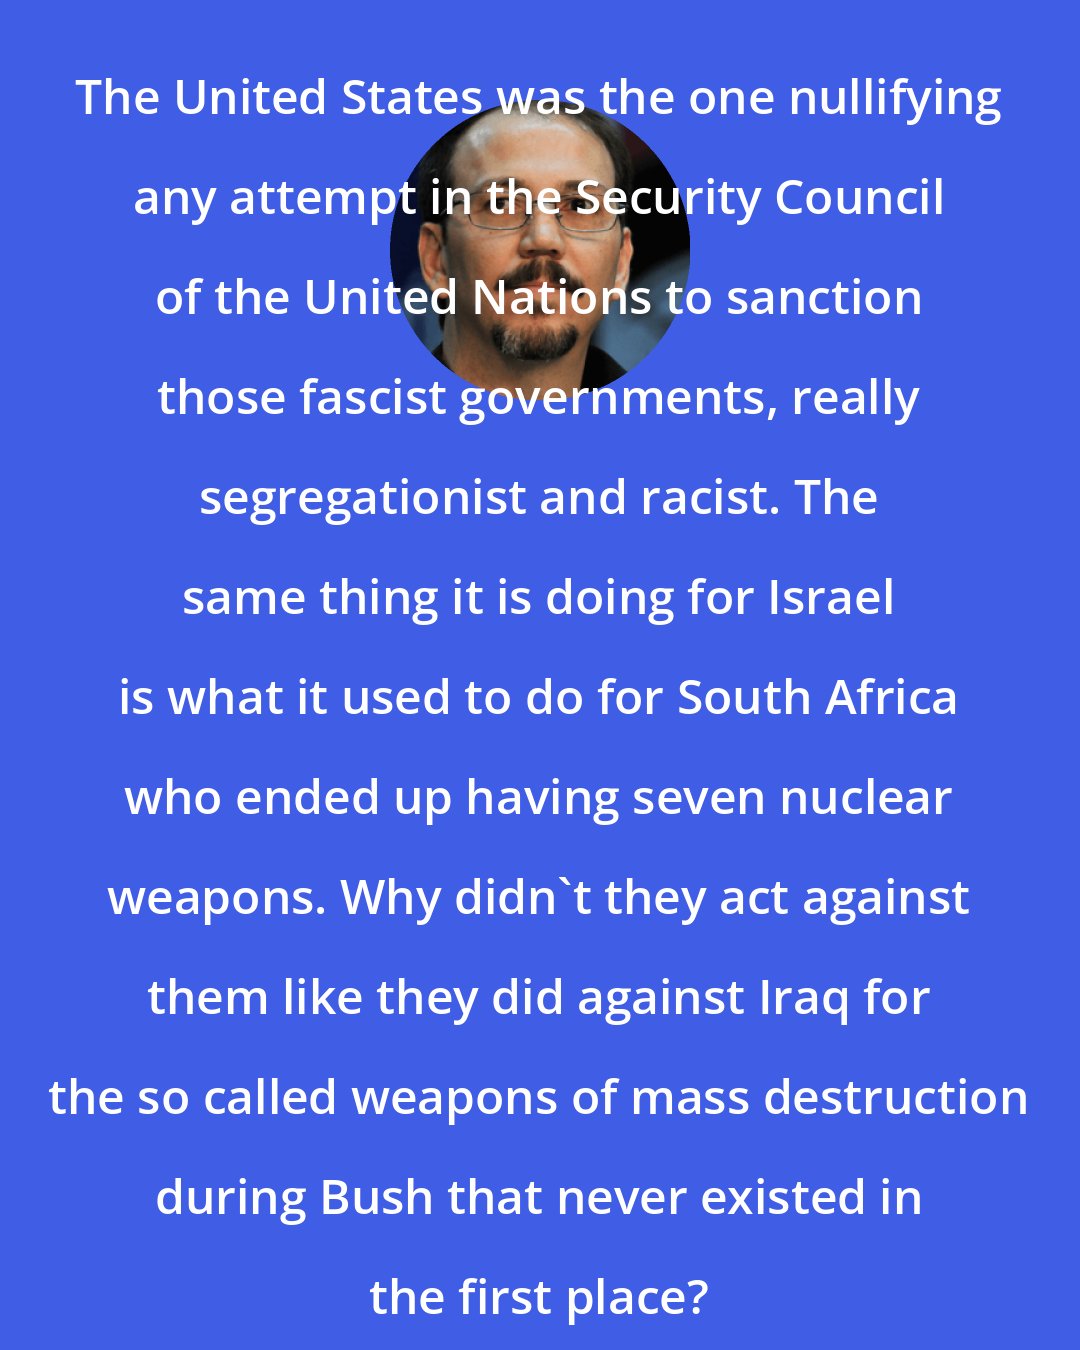 Alejandro Castro Espin: The United States was the one nullifying any attempt in the Security Council of the United Nations to sanction those fascist governments, really segregationist and racist. The same thing it is doing for Israel is what it used to do for South Africa who ended up having seven nuclear weapons. Why didn't they act against them like they did against Iraq for the so called weapons of mass destruction during Bush that never existed in the first place?